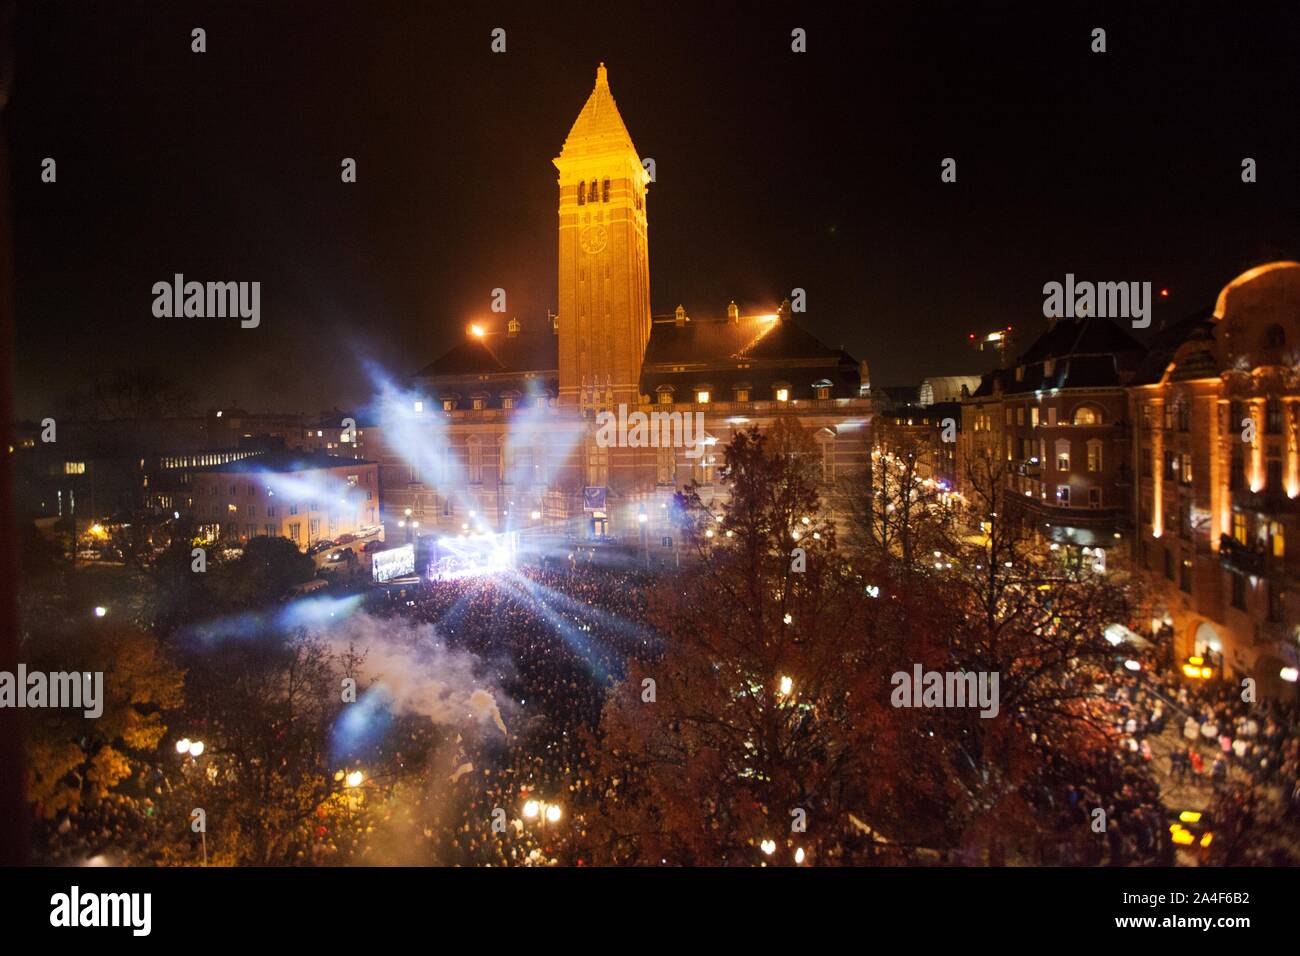 Over 20,000 fans on the German square in Norrköping celebrated the gold heroes of IFK Norrköping after the Swedish gold in football. Photo Jeppe Gustafsson Stock Photo